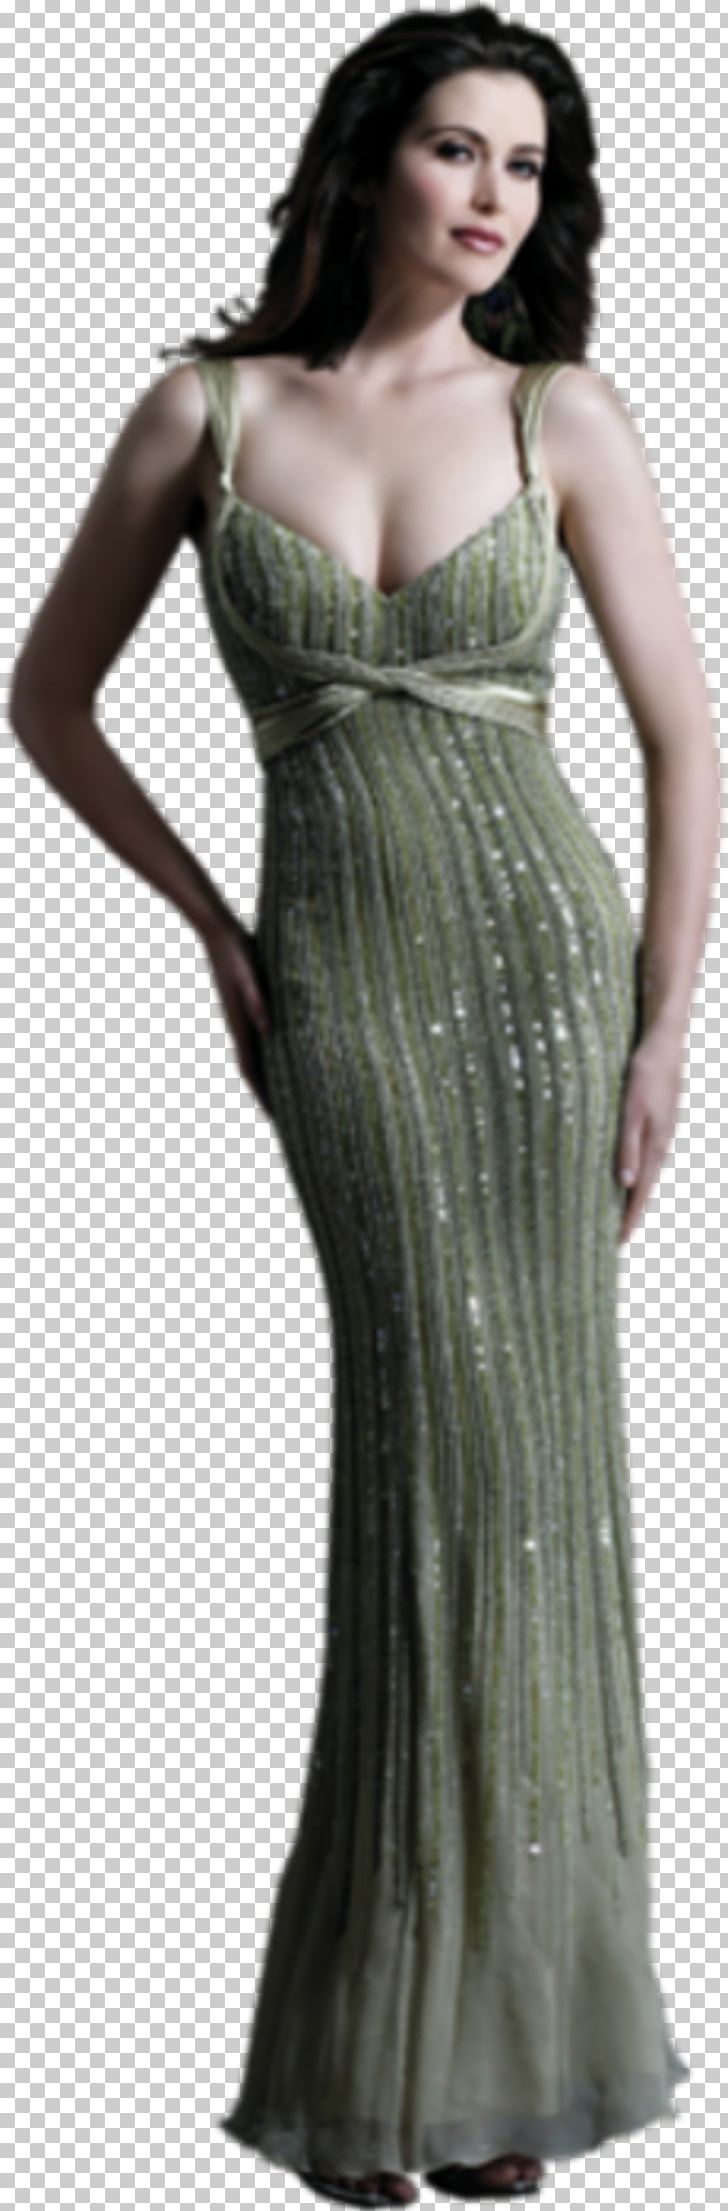 Evening Gown Cocktail Dress Woman PNG, Clipart, Abendgesellschaft, Bayan, Clothing, Cocktail, Cocktail Dress Free PNG Download